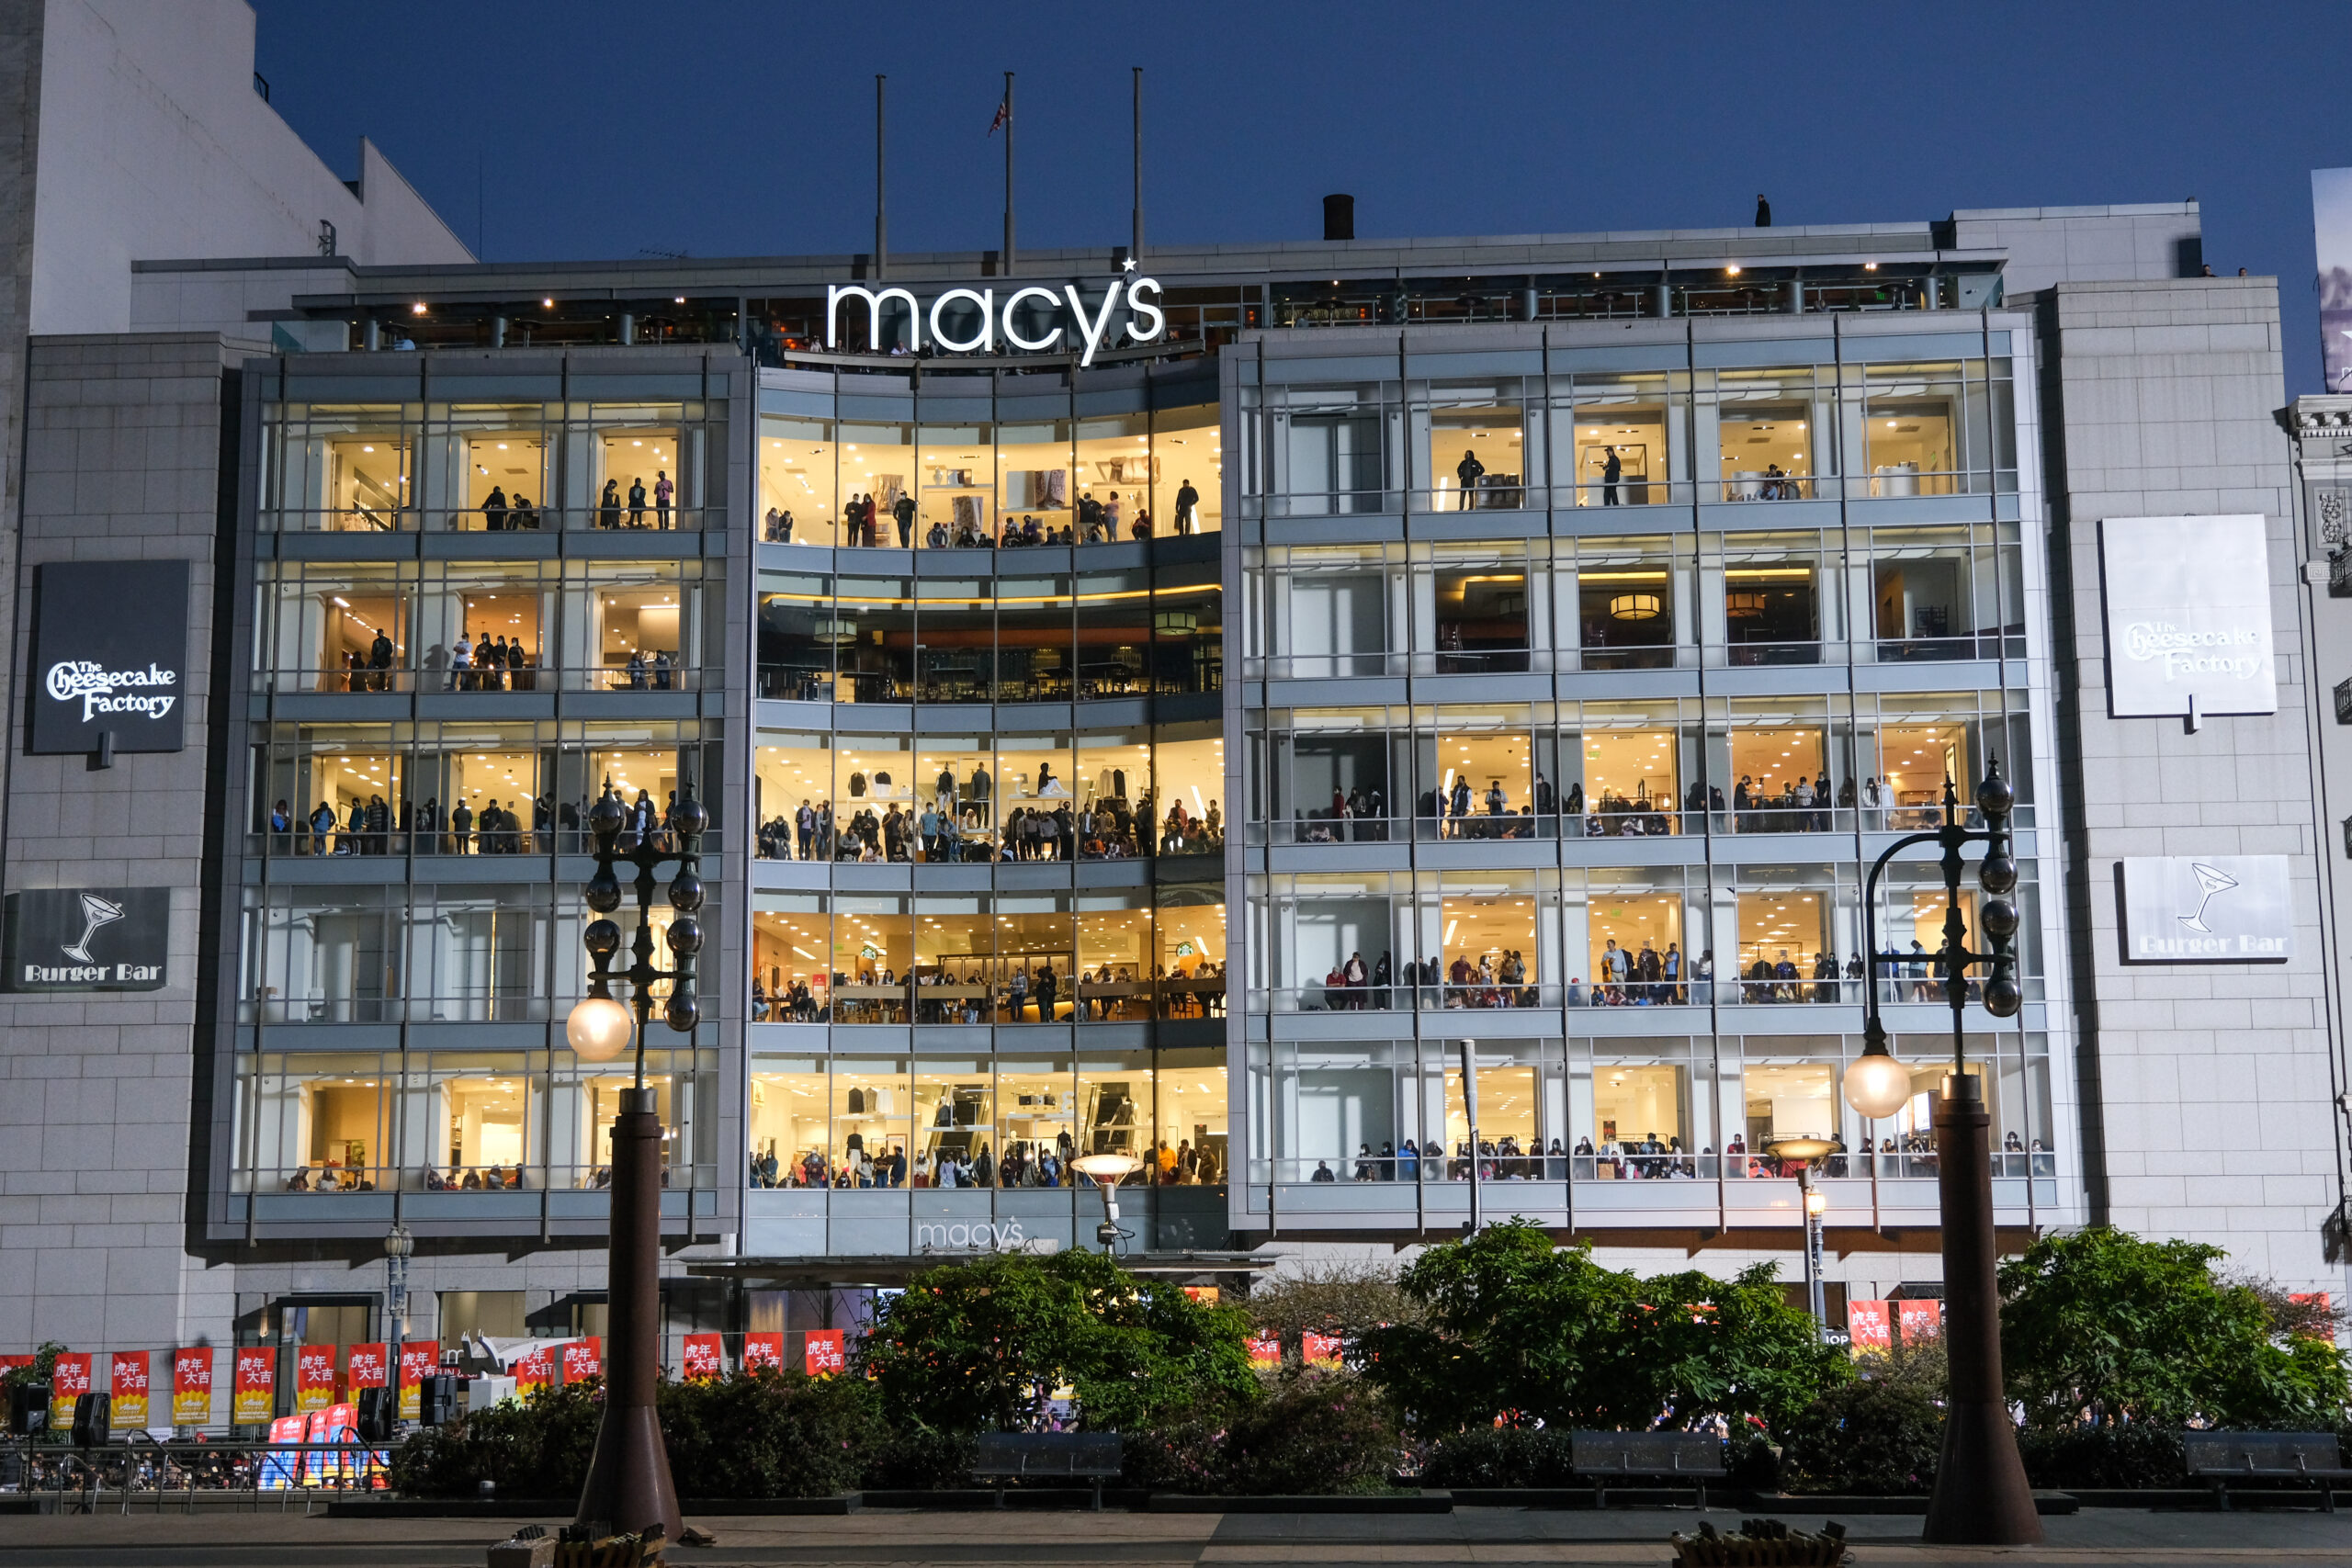 A night-time photo of a multi-story Macy's store with illuminated interiors and visible shoppers.